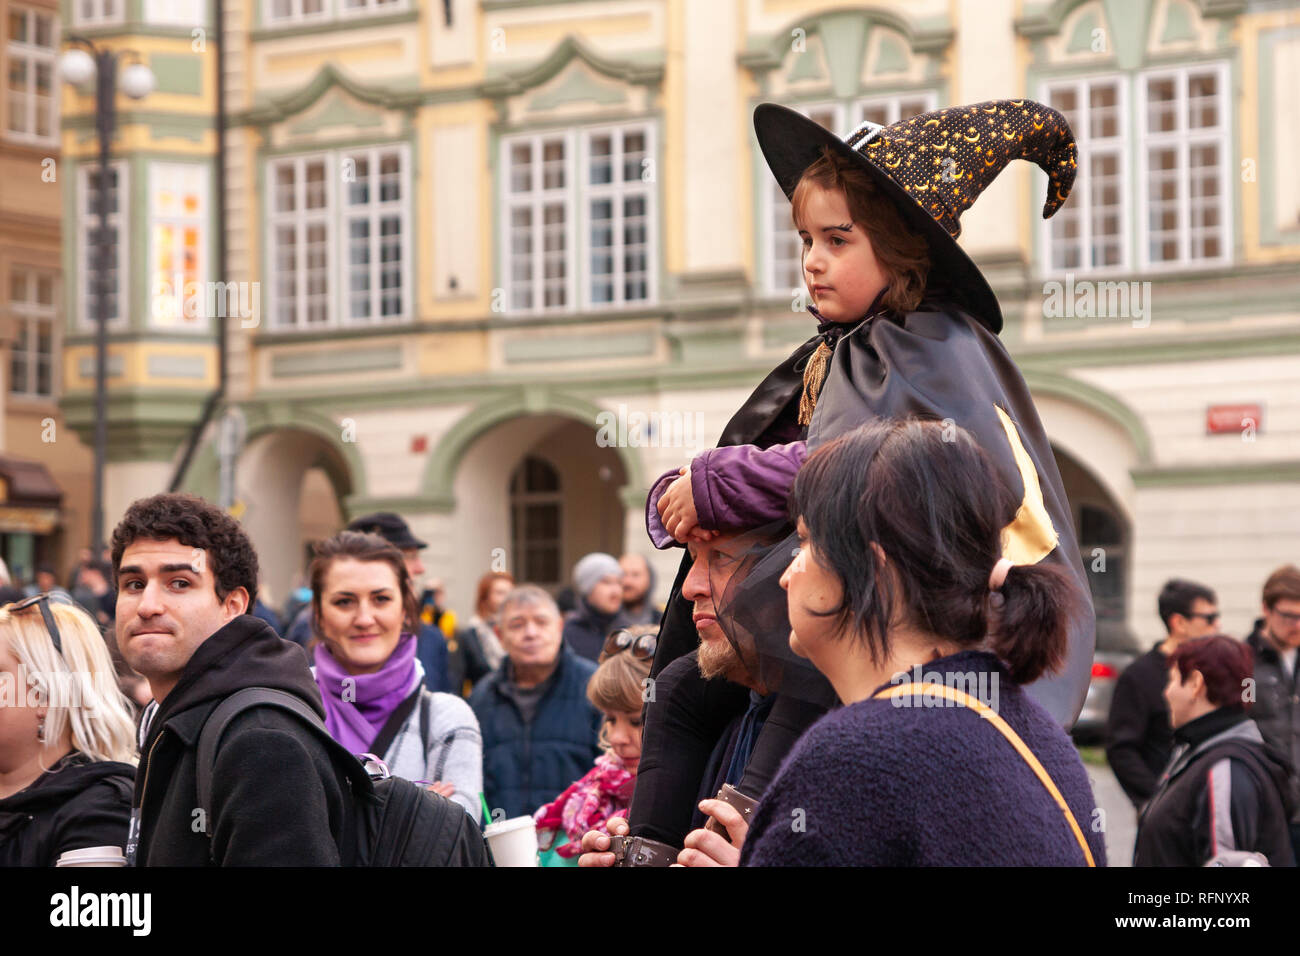 PRAGUE, CZECH REPUBLIC - APRIL 30, 2017: Costumed child in the streets of Prague during the carodejnice festival, or witch burning night Stock Photo